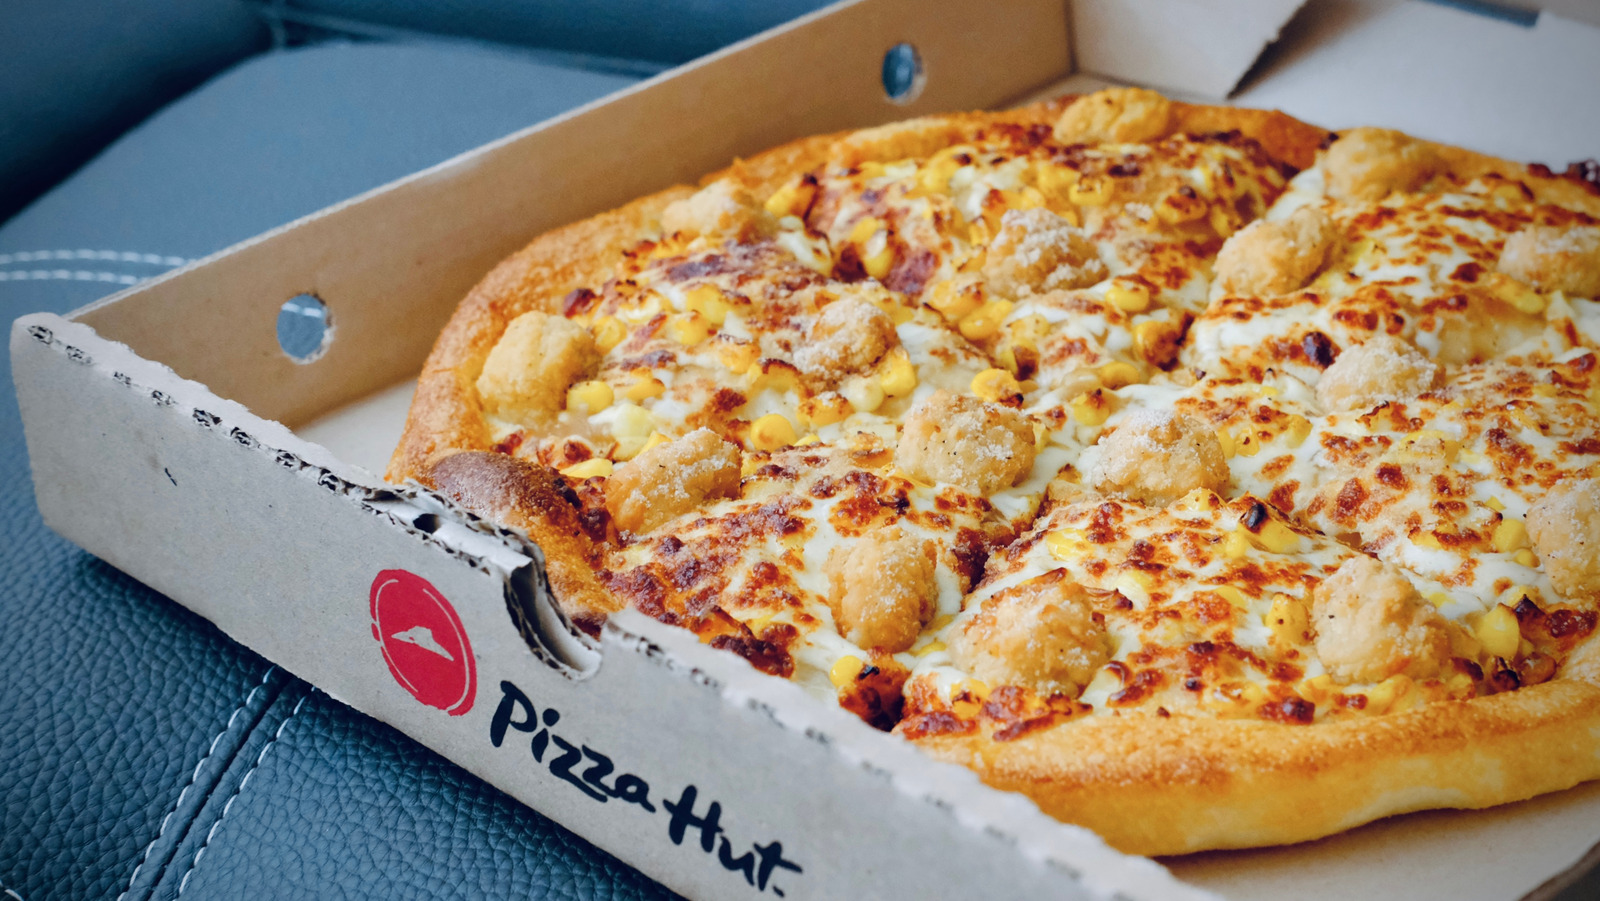 Pizza Hut Brings Back The Big Dinner Box For $19.99 Just In Time